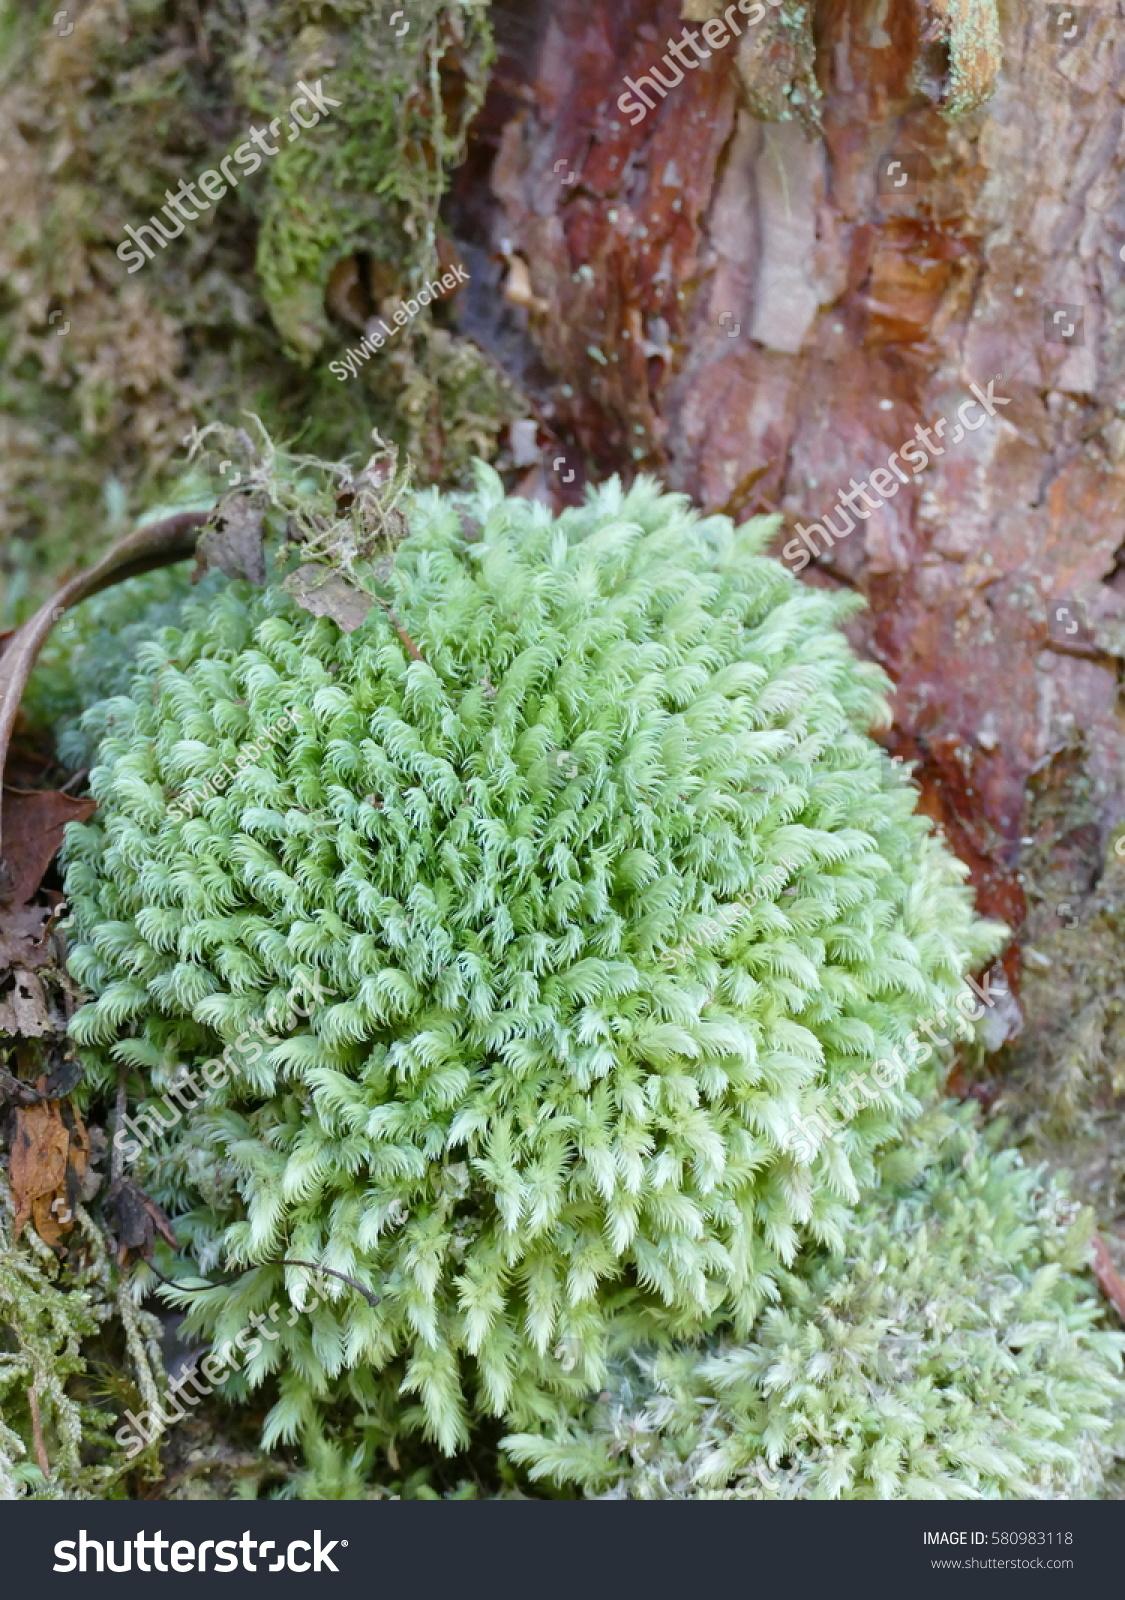 stock-photo-the-leucobryum-candidum-is-a-true-mosse-it-is-an-epiphyte-moss-with-a-silver-green-coloring-that-580983118.jpg